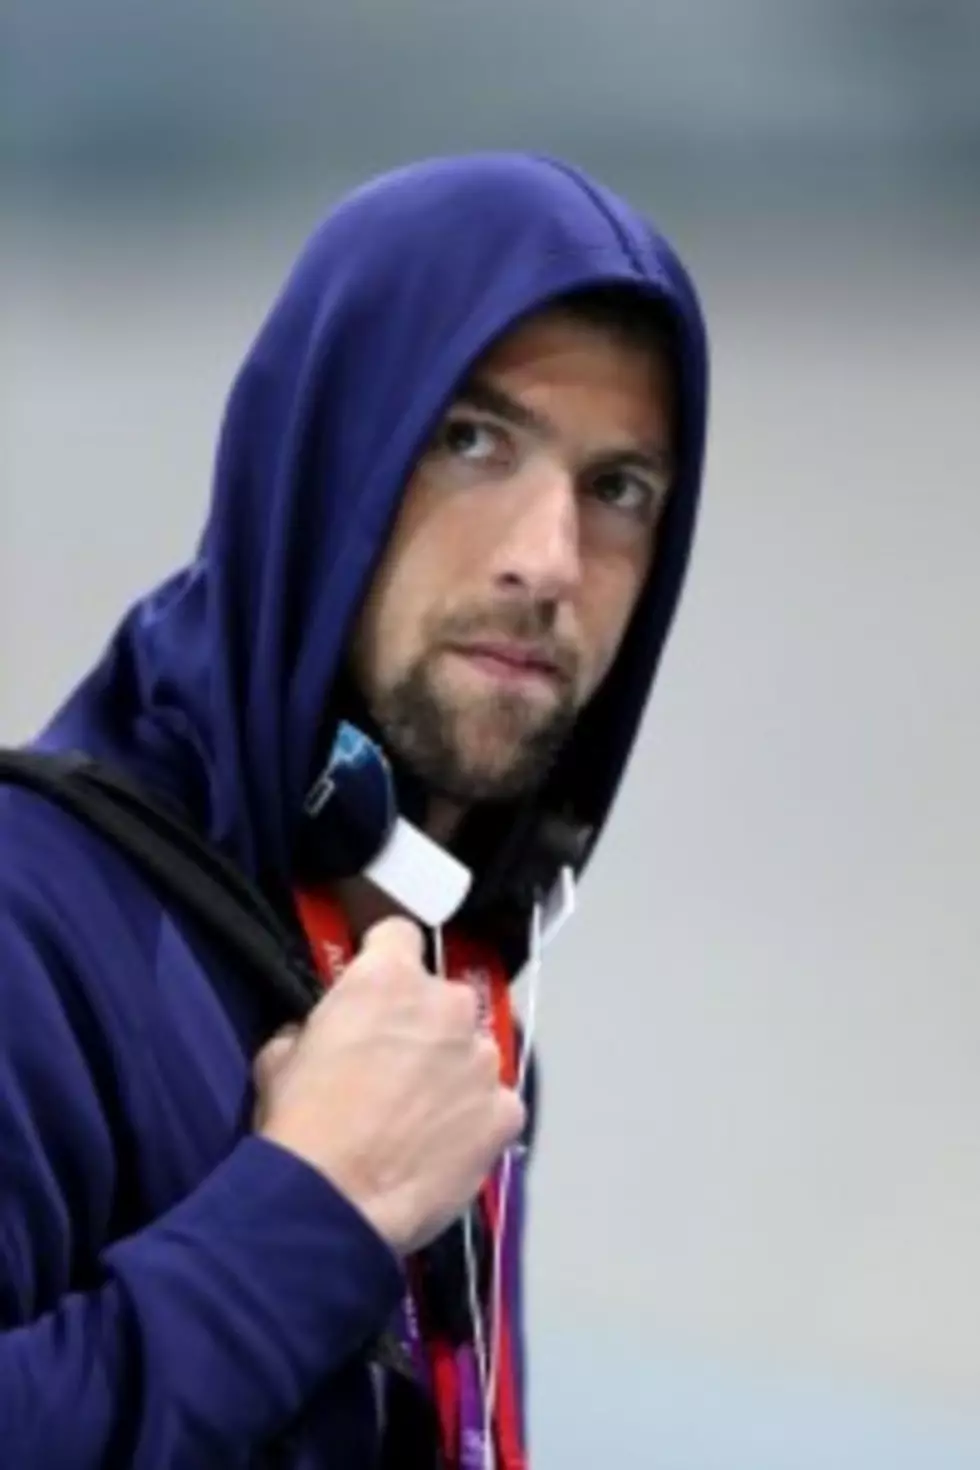 U.S. Olympic Swimmer Michael Phelps Will Not Walk With The U.S. Olympic Team During The 2012 Opening Ceremonies